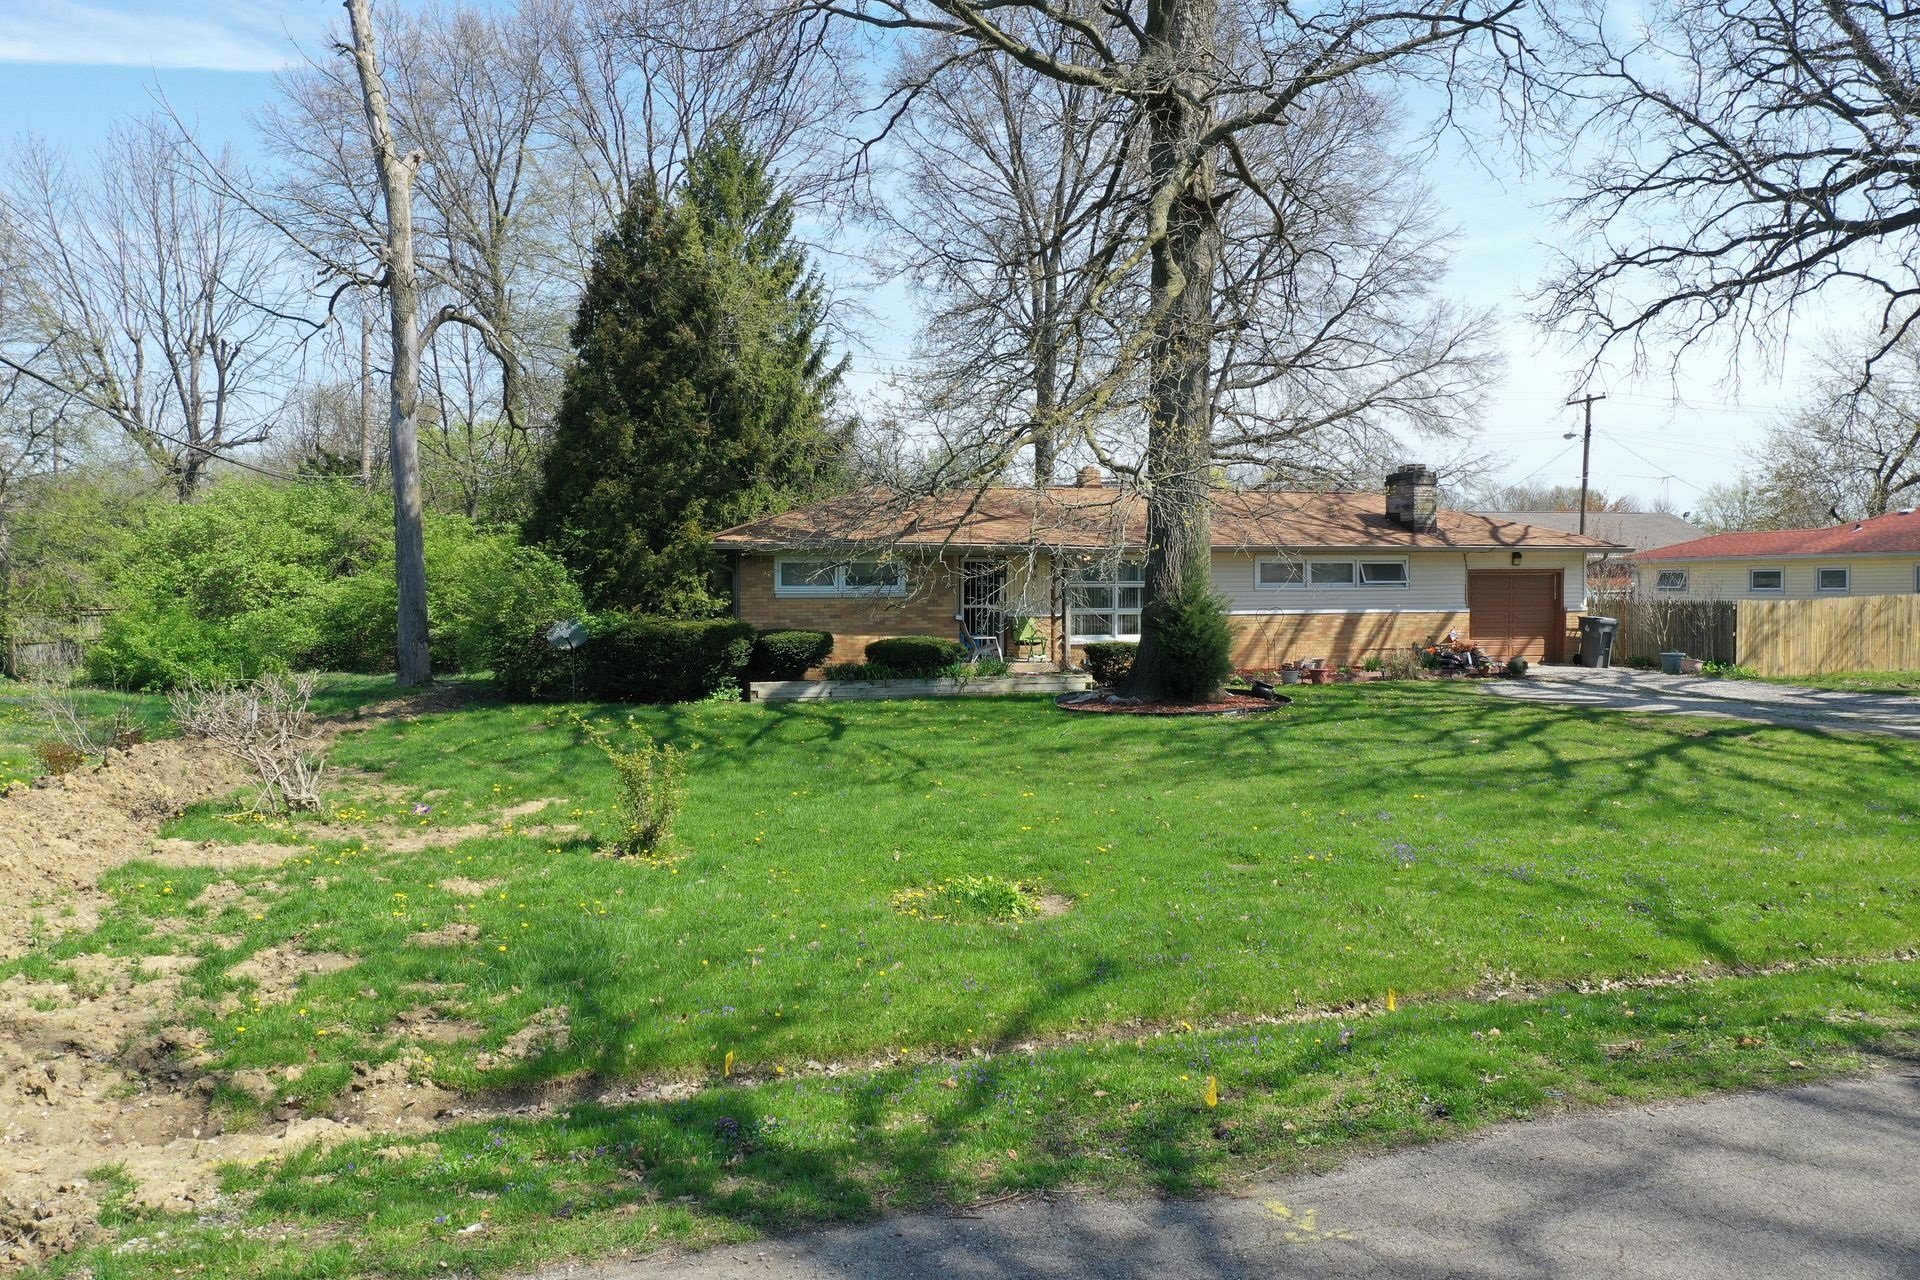 7406 E 33RD ST Indianapolis, IN 46226